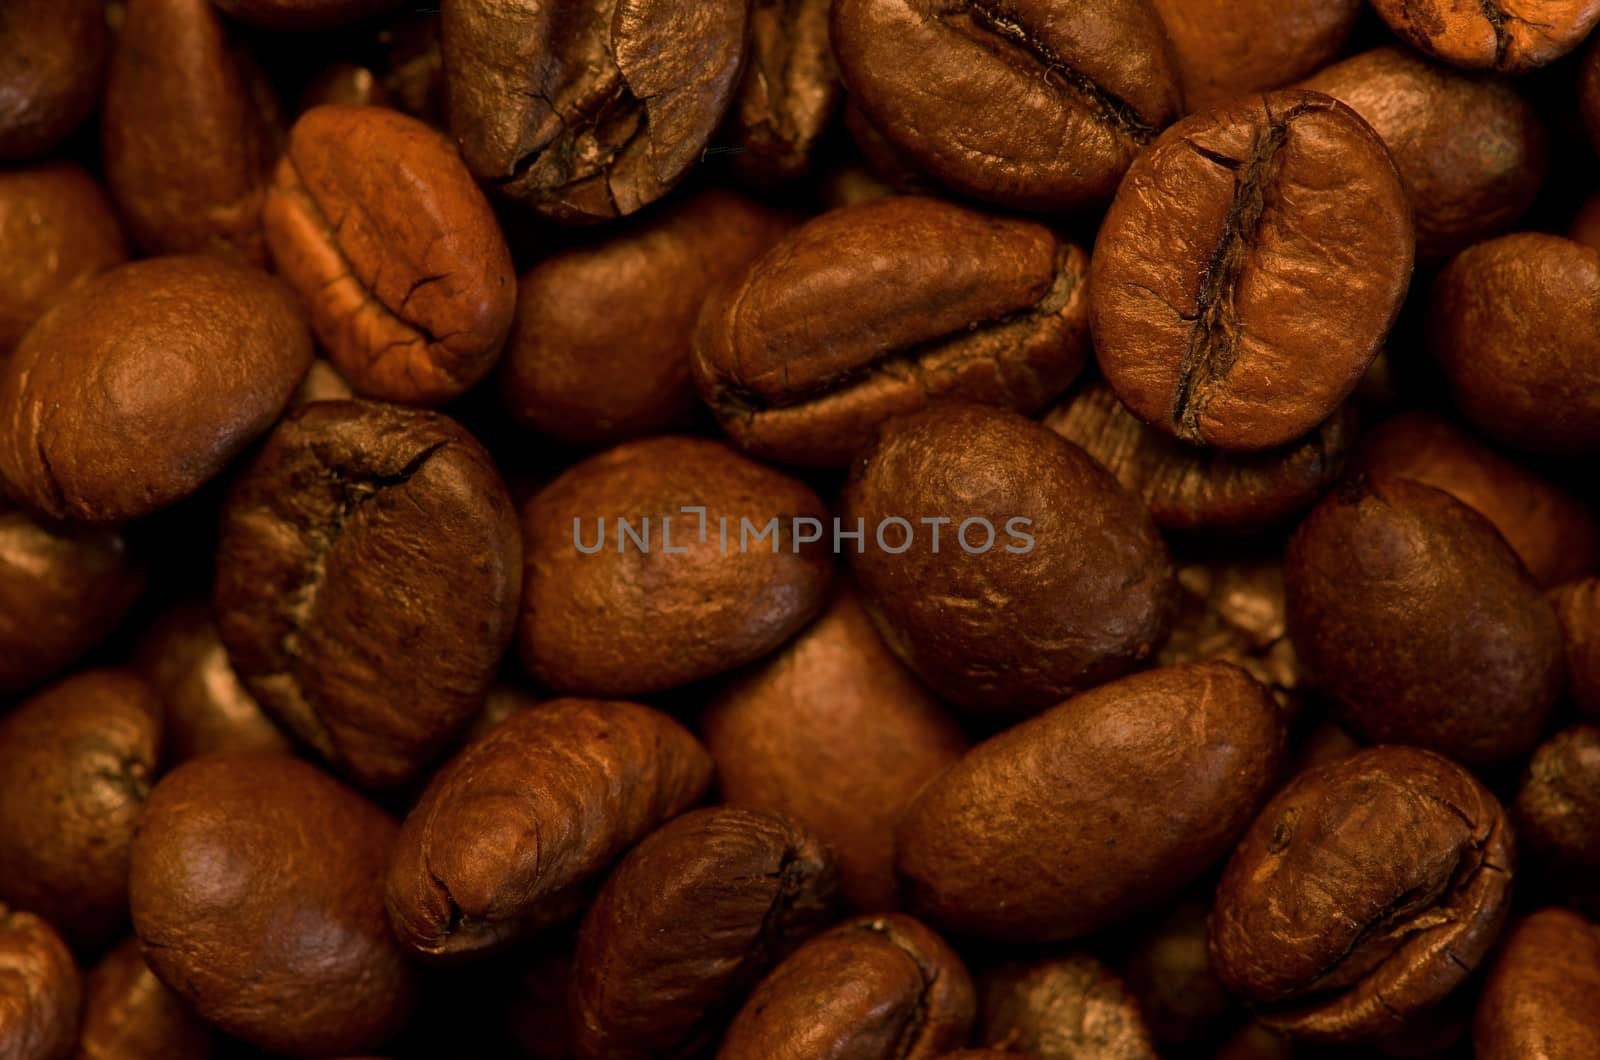 several roasted coffee seeds like texture and background